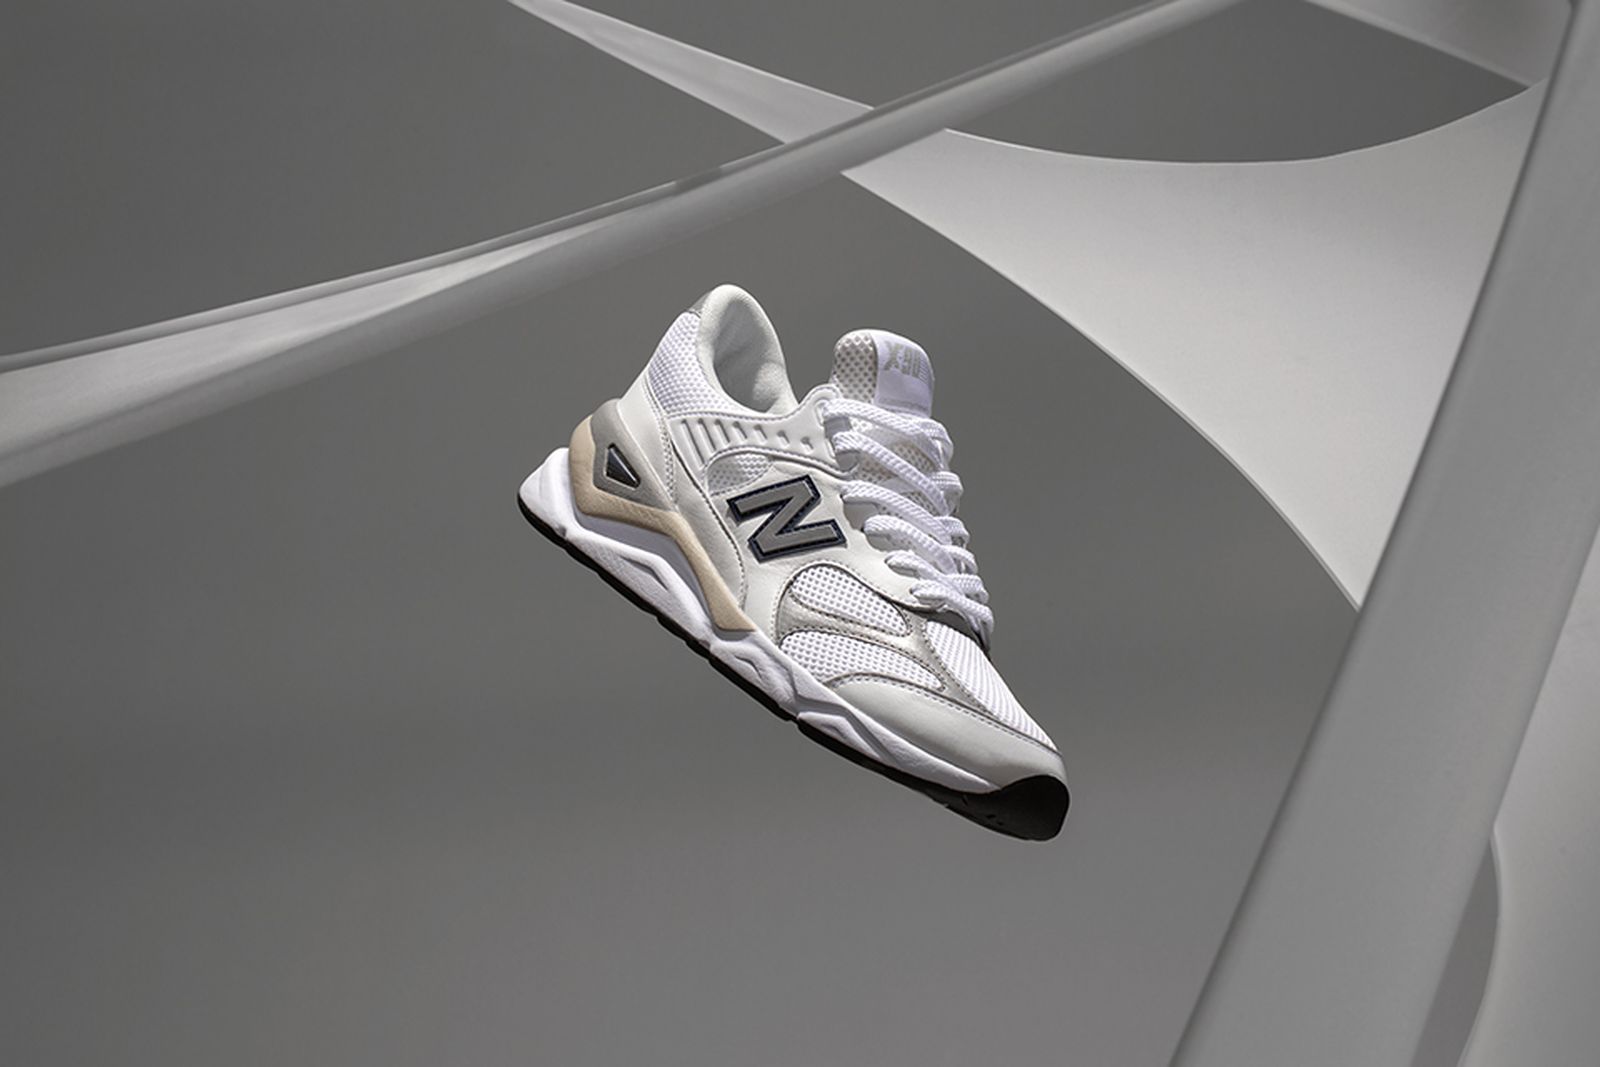 New Balance X-90 "Reconstructed" Pack: Release & More